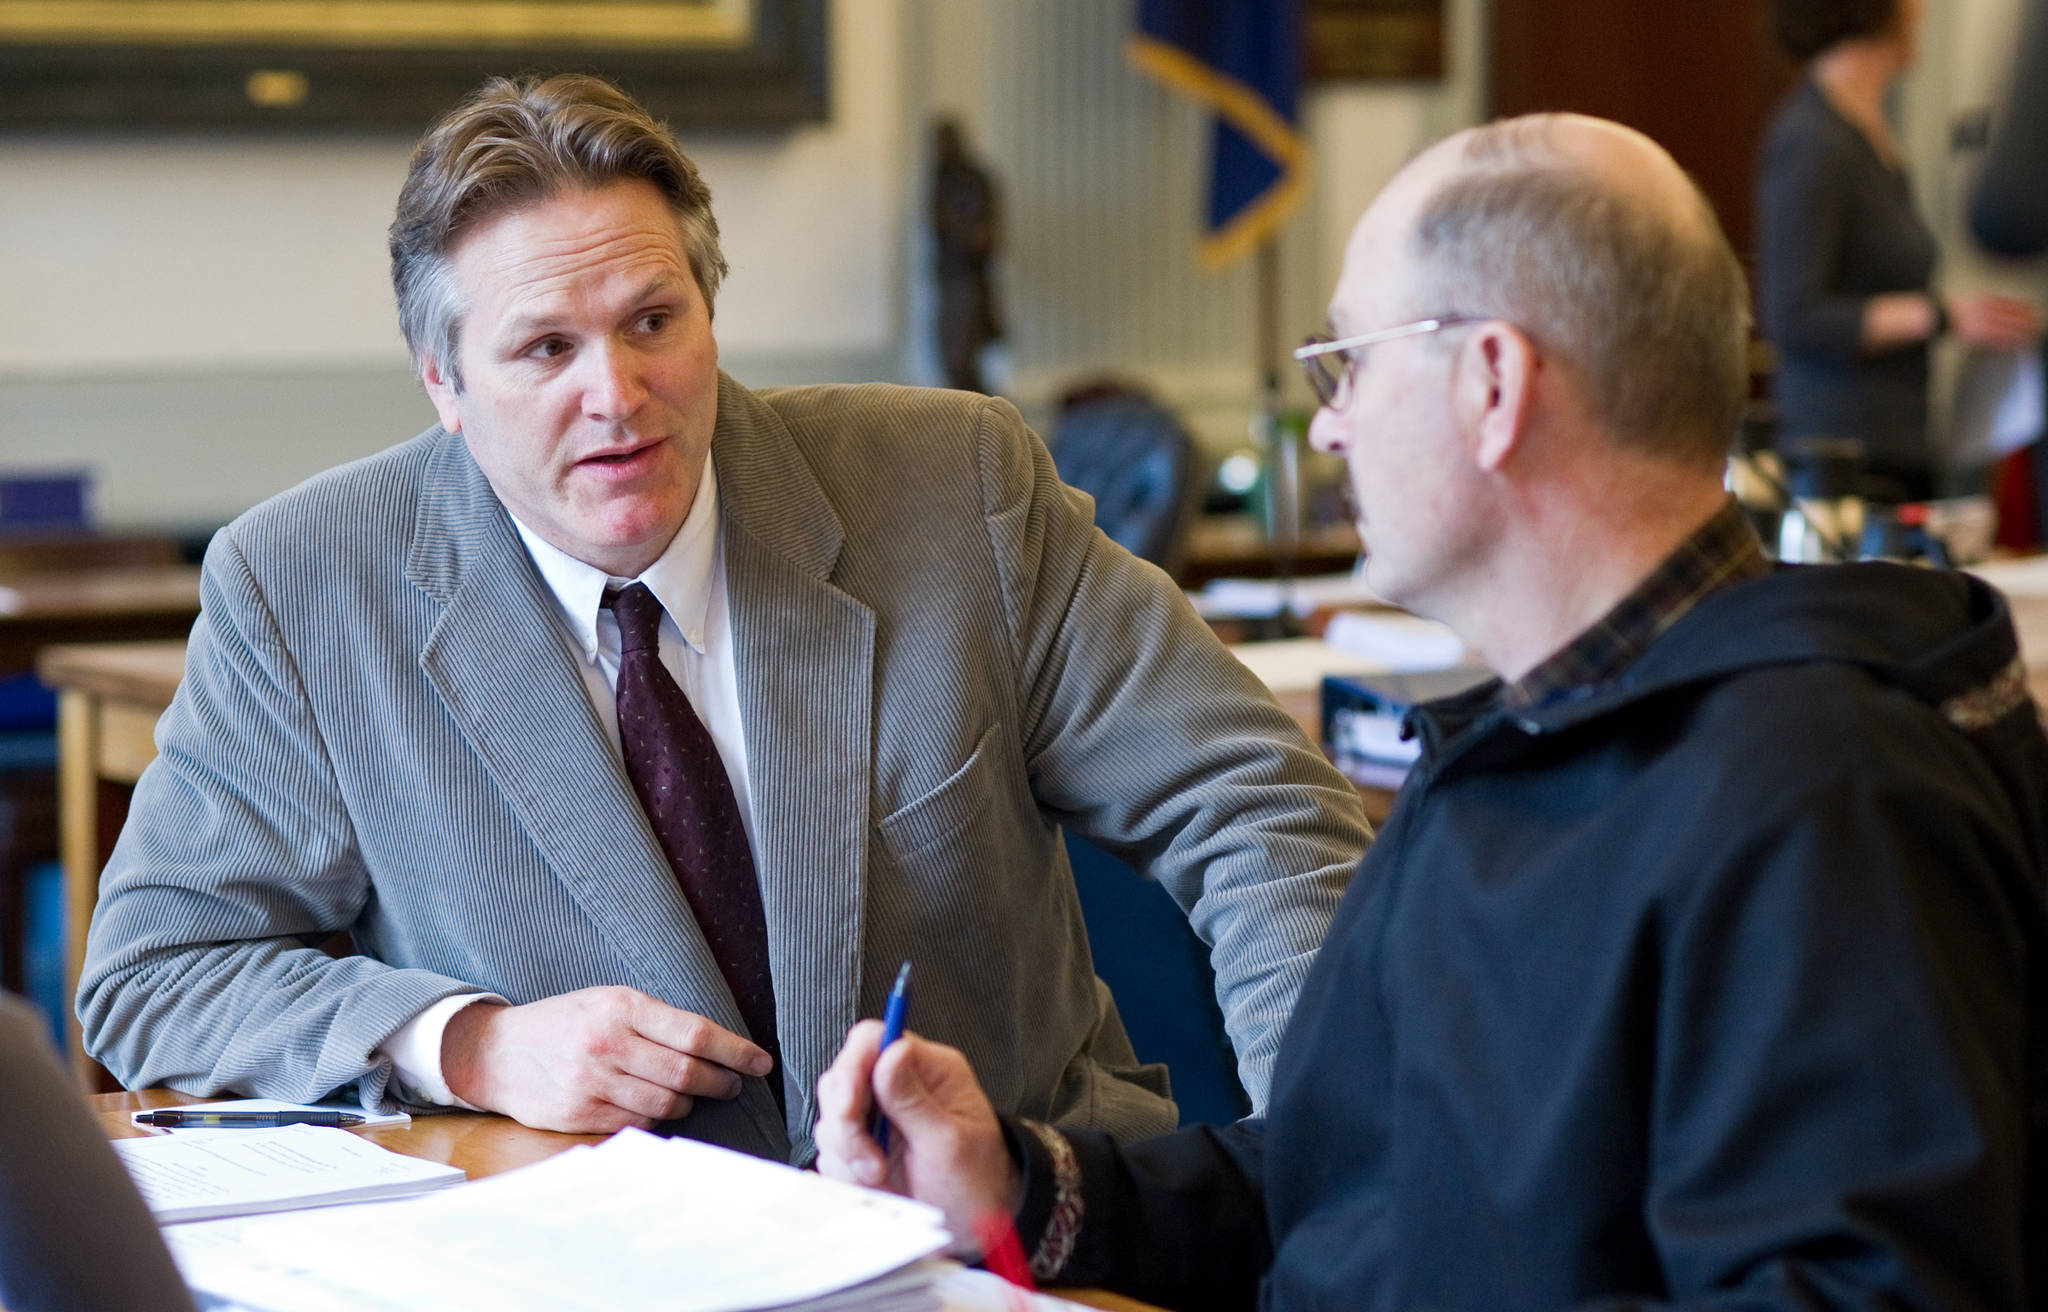 In this April 2014 file photo, Sen. Mike Dunleavy, R-Wasilla, left, speaks with Sen. Click Bishop, R-Fairbanks, before their Senate Finanace Committee meeting at the Capitol. (Michael Penn | Juneau Empire File)